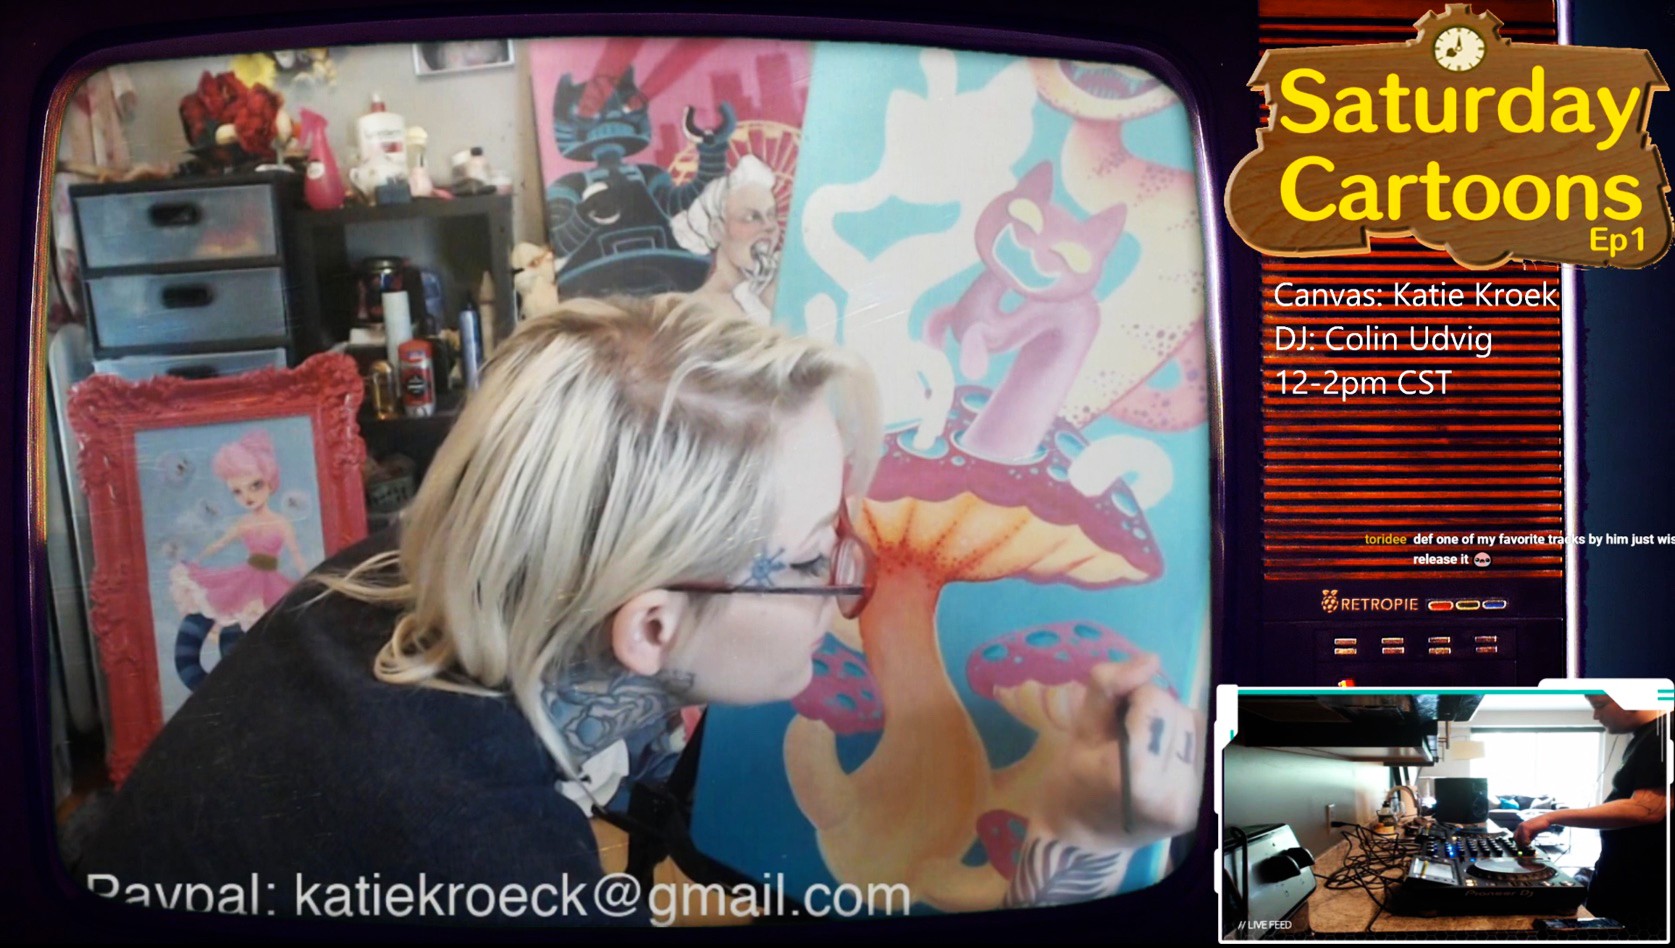 Katie Kroeck, a local tattoo and visual artist, paints while Colin Udvig DJs during the first episode of Saturday Cartoons, which was livestreamed on PaulChangStreams Twitch channel on Saturday, May 23. 